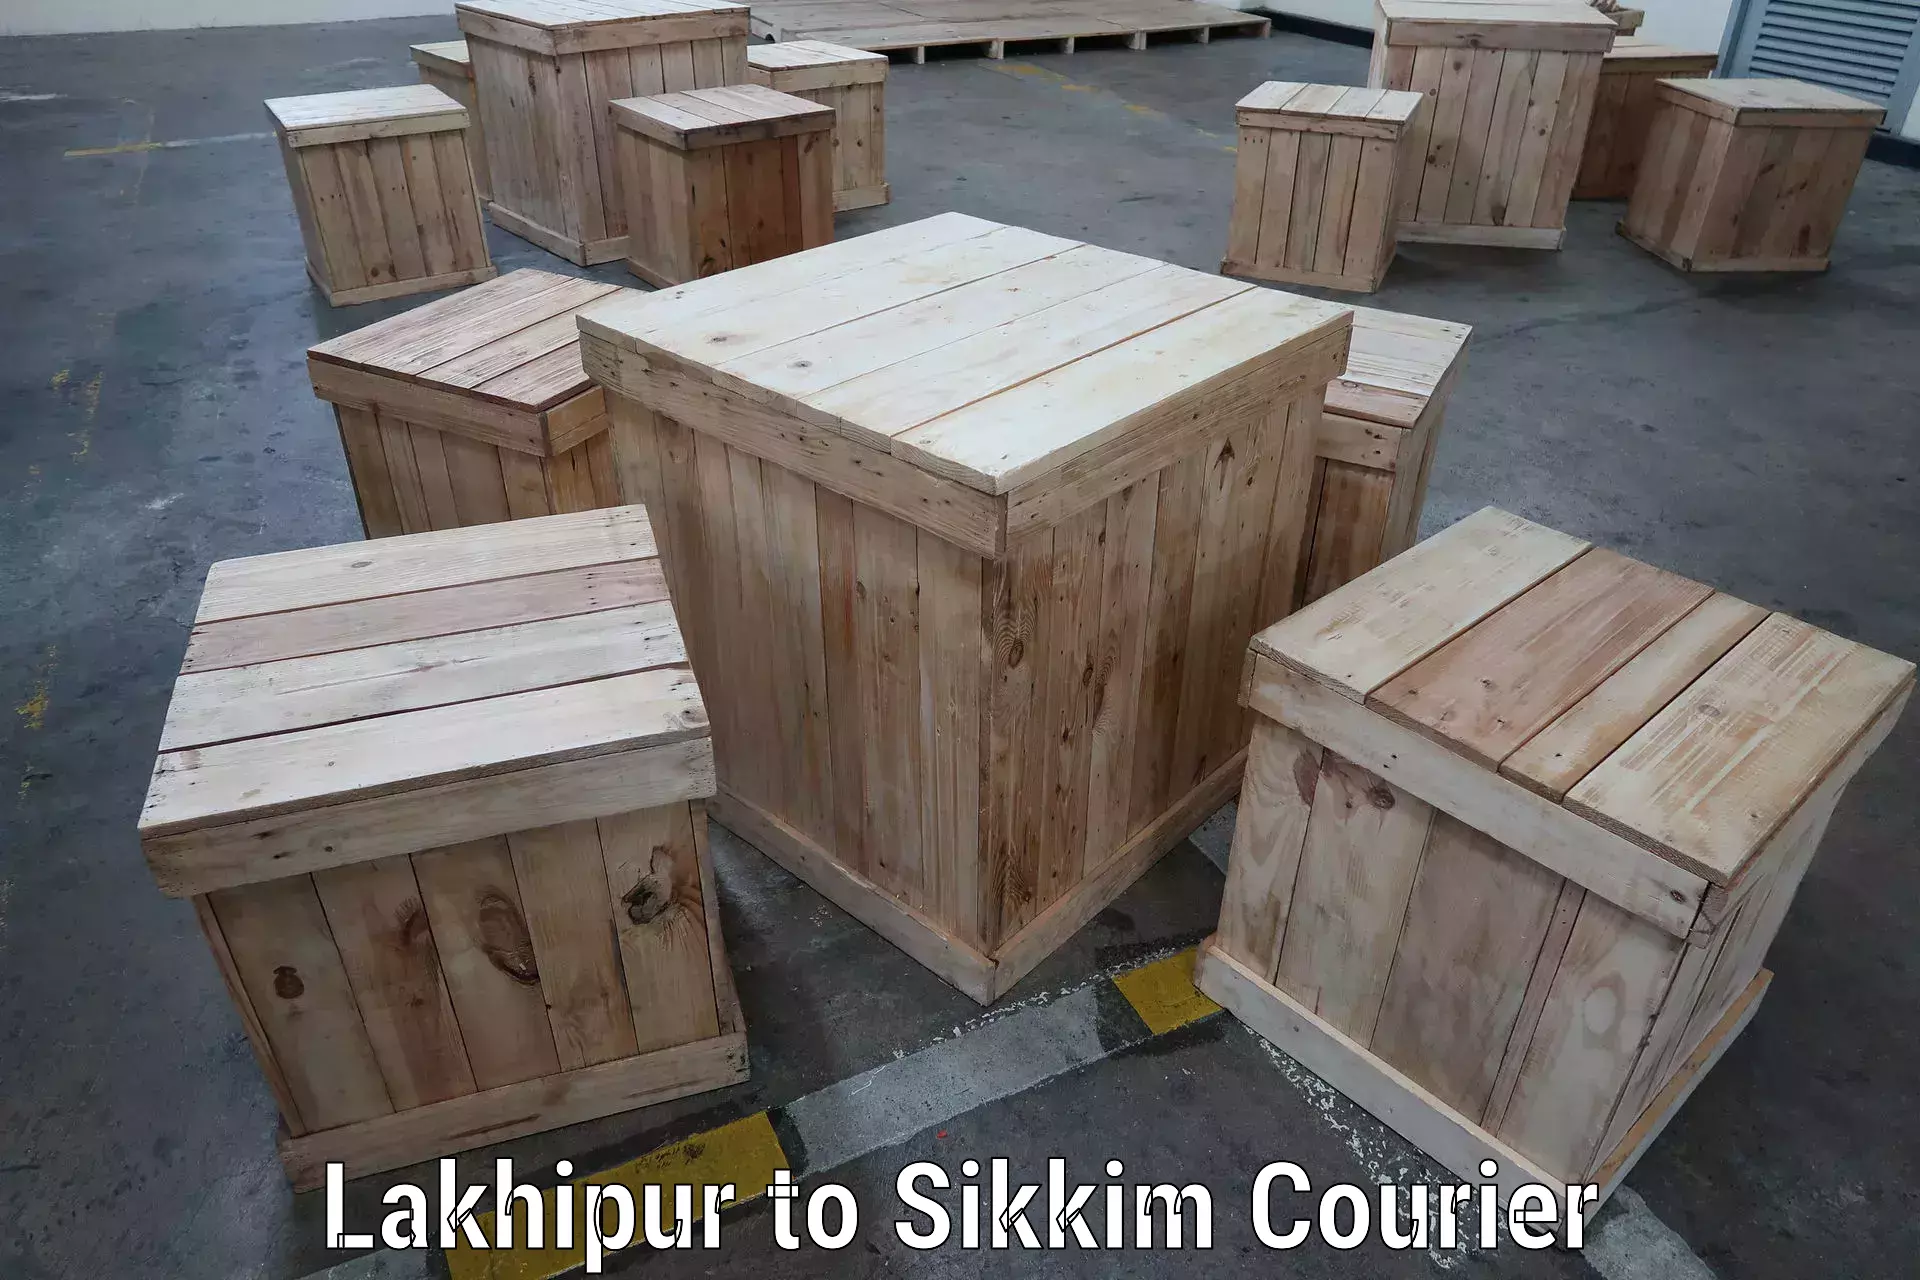 Full-service courier options Lakhipur to Jorethang